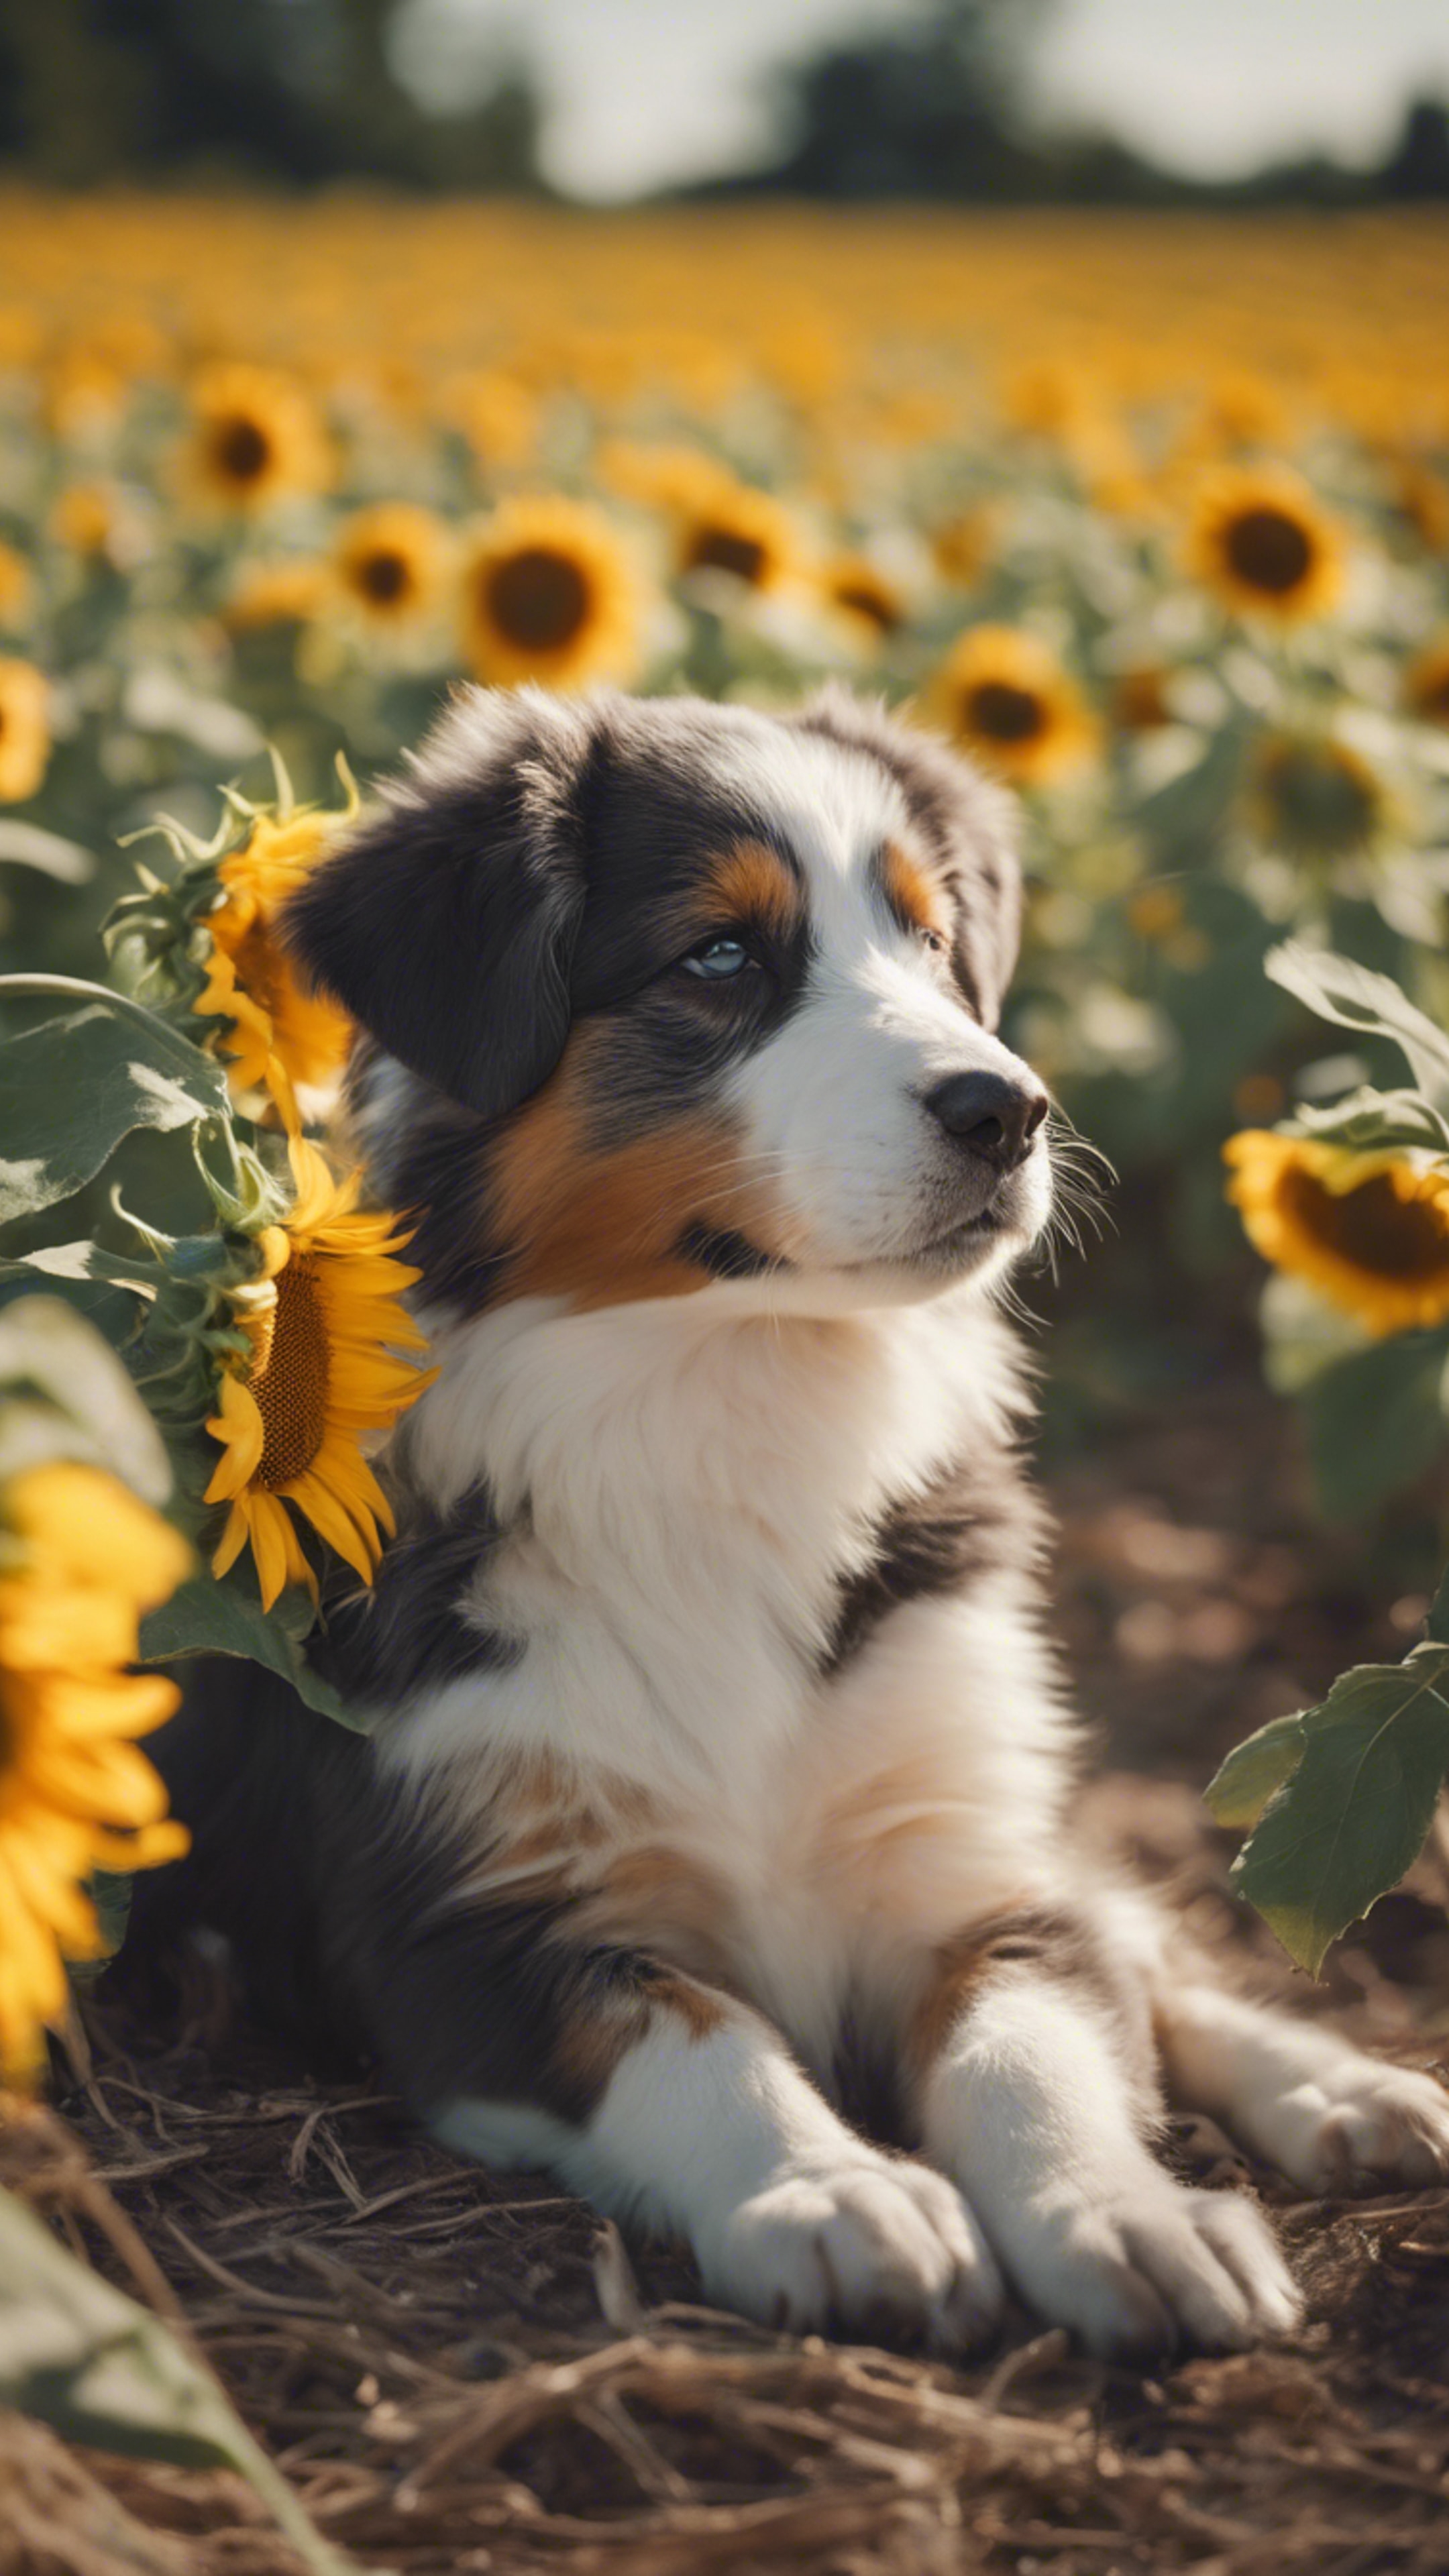 An Australian Shepard puppy dozing off in the field of blooming sunflowers under the summer sun. Tapet[3112e983c8704a9792f4]